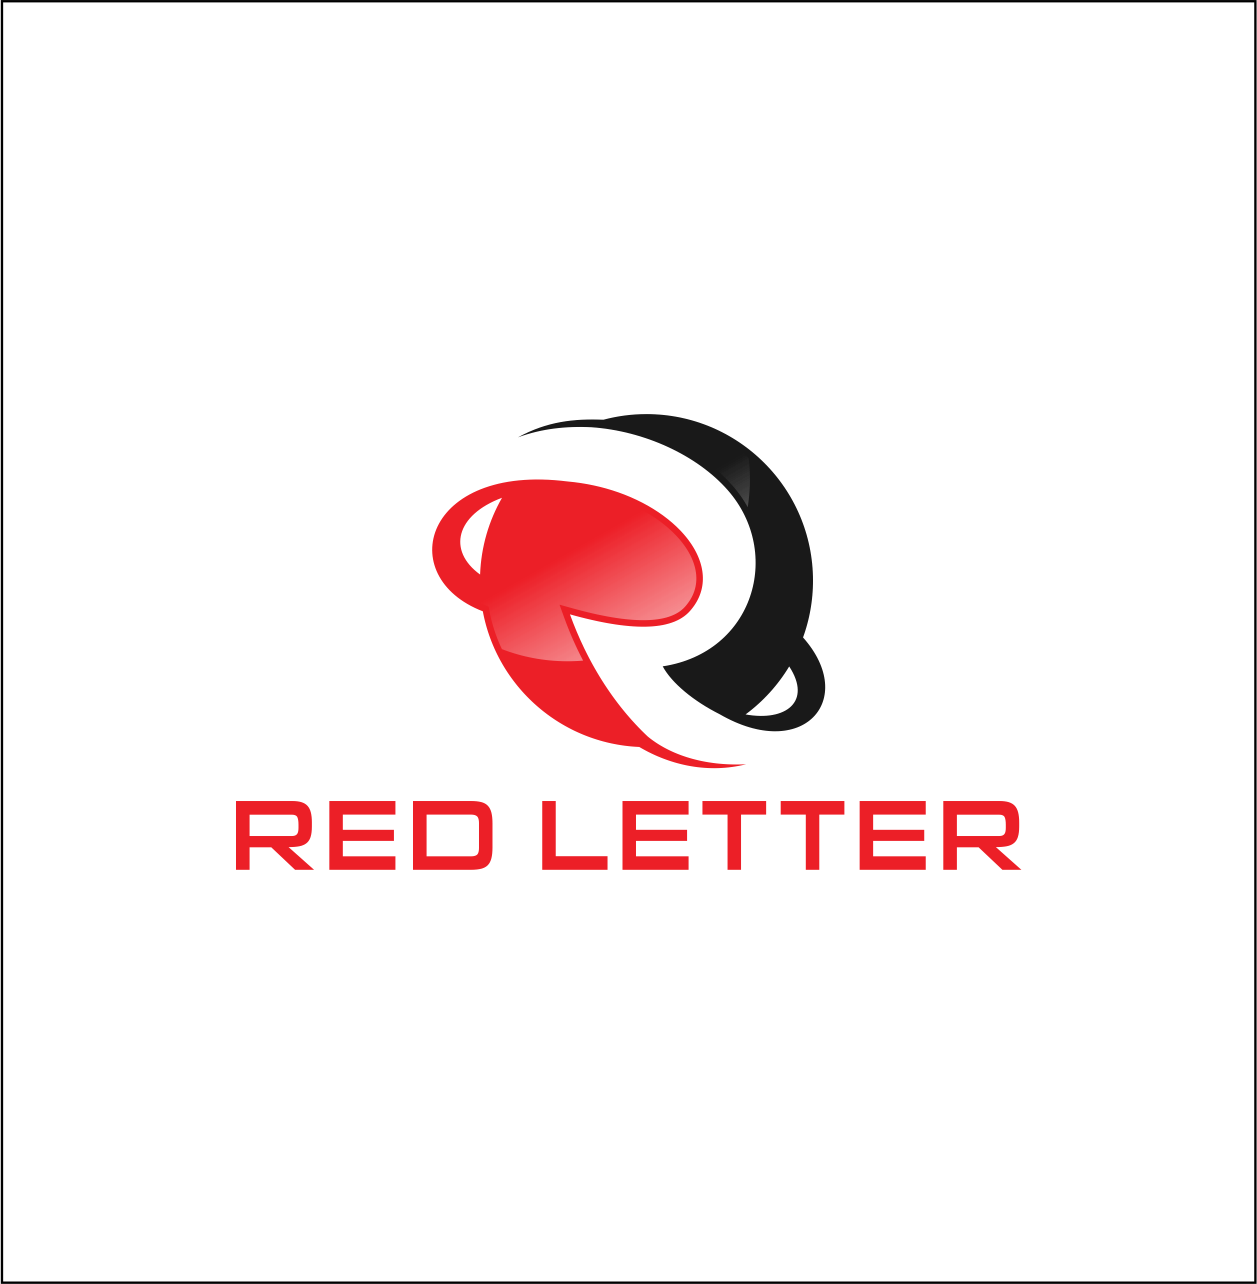 Red Letter Company Logo - Modern, Bold, It Company Logo Design for Red Letter by SATRIA ARJUNA ...